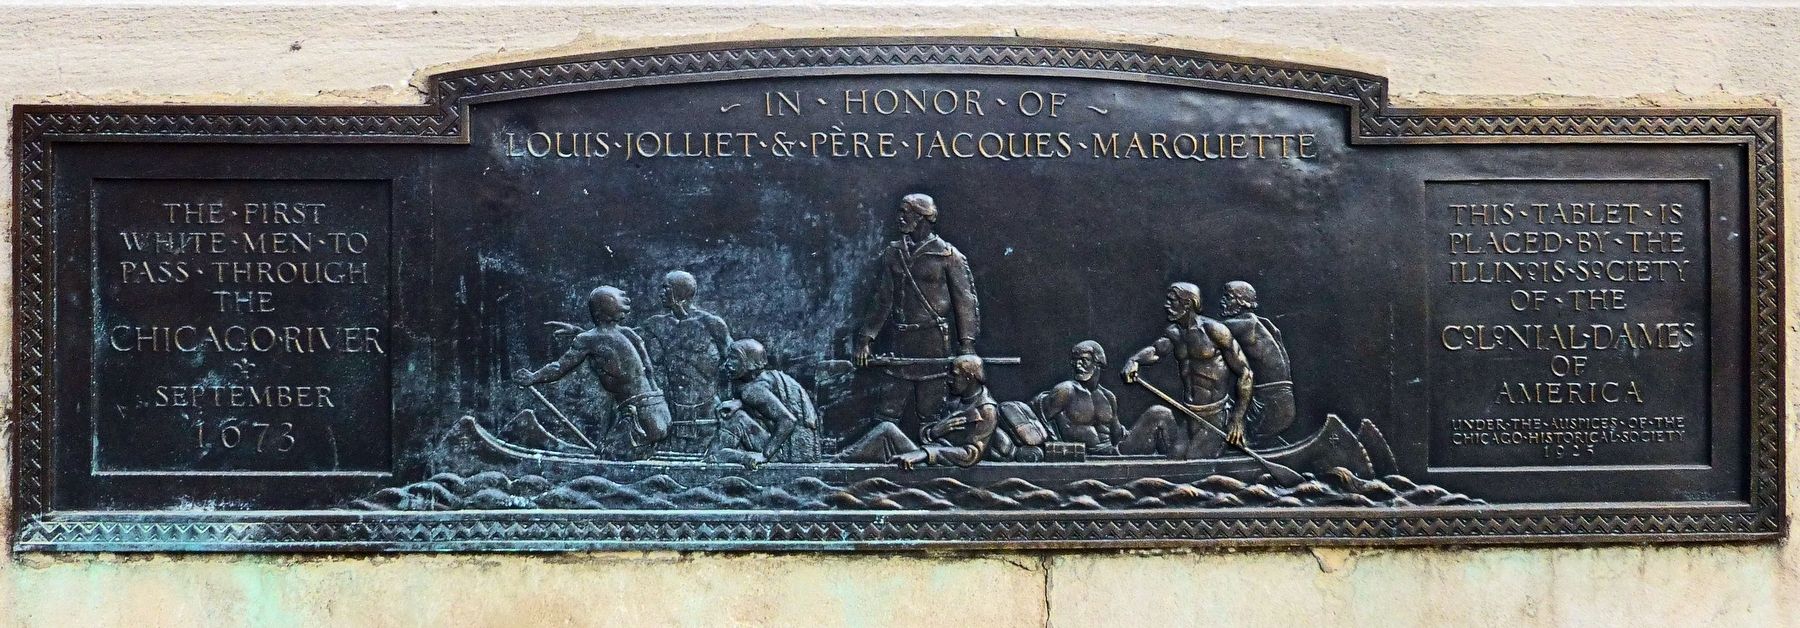 Louis Jolliet & Pre Jacques Marquette Marker image. Click for full size.